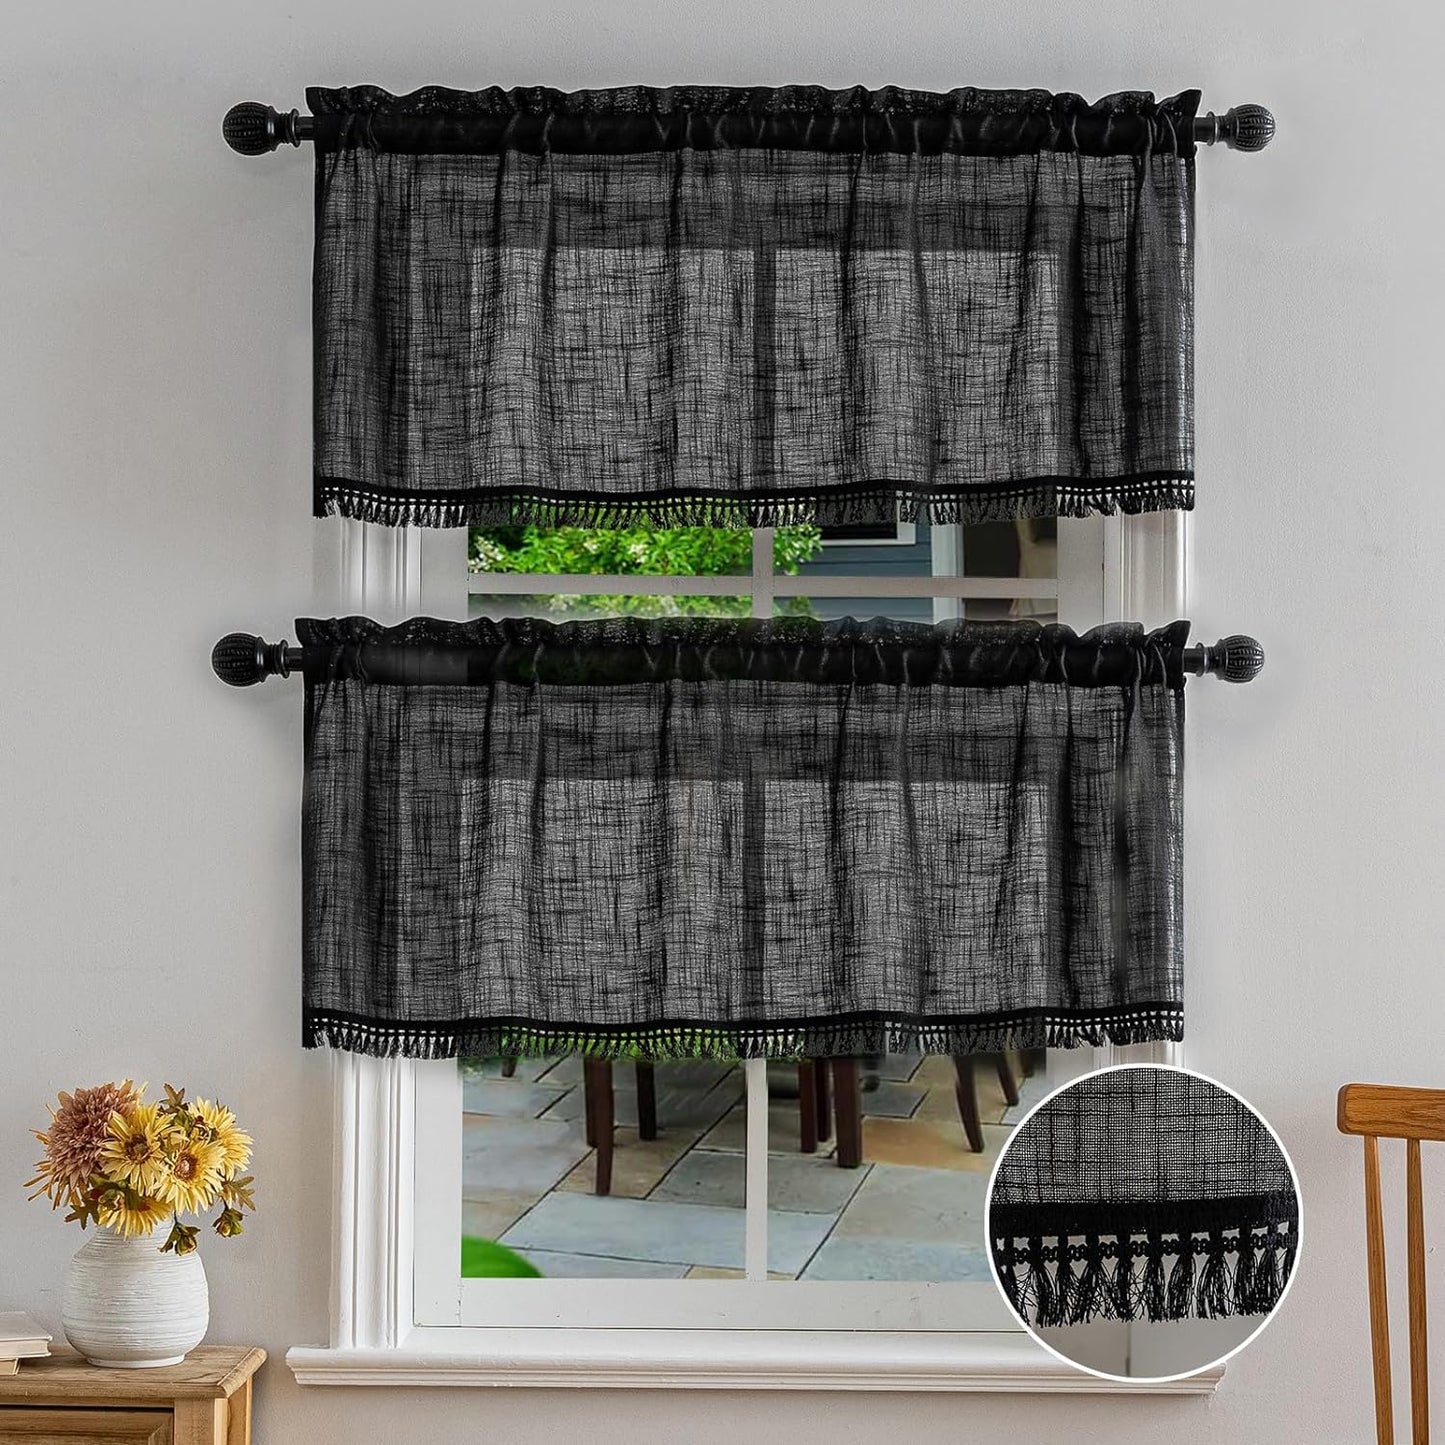 Beda Home Tassel Linen Textured Swag Curtain Valance for Farmhouses’ Kitchen; Light Filtering Rustic Short Swag Topper for Small Windows Bedroom Privacy Added Rod Pocket Design(Nature 36X63-2Pcs)  BD BEDA HOME Black 52Wx18L - 2 Pcs 